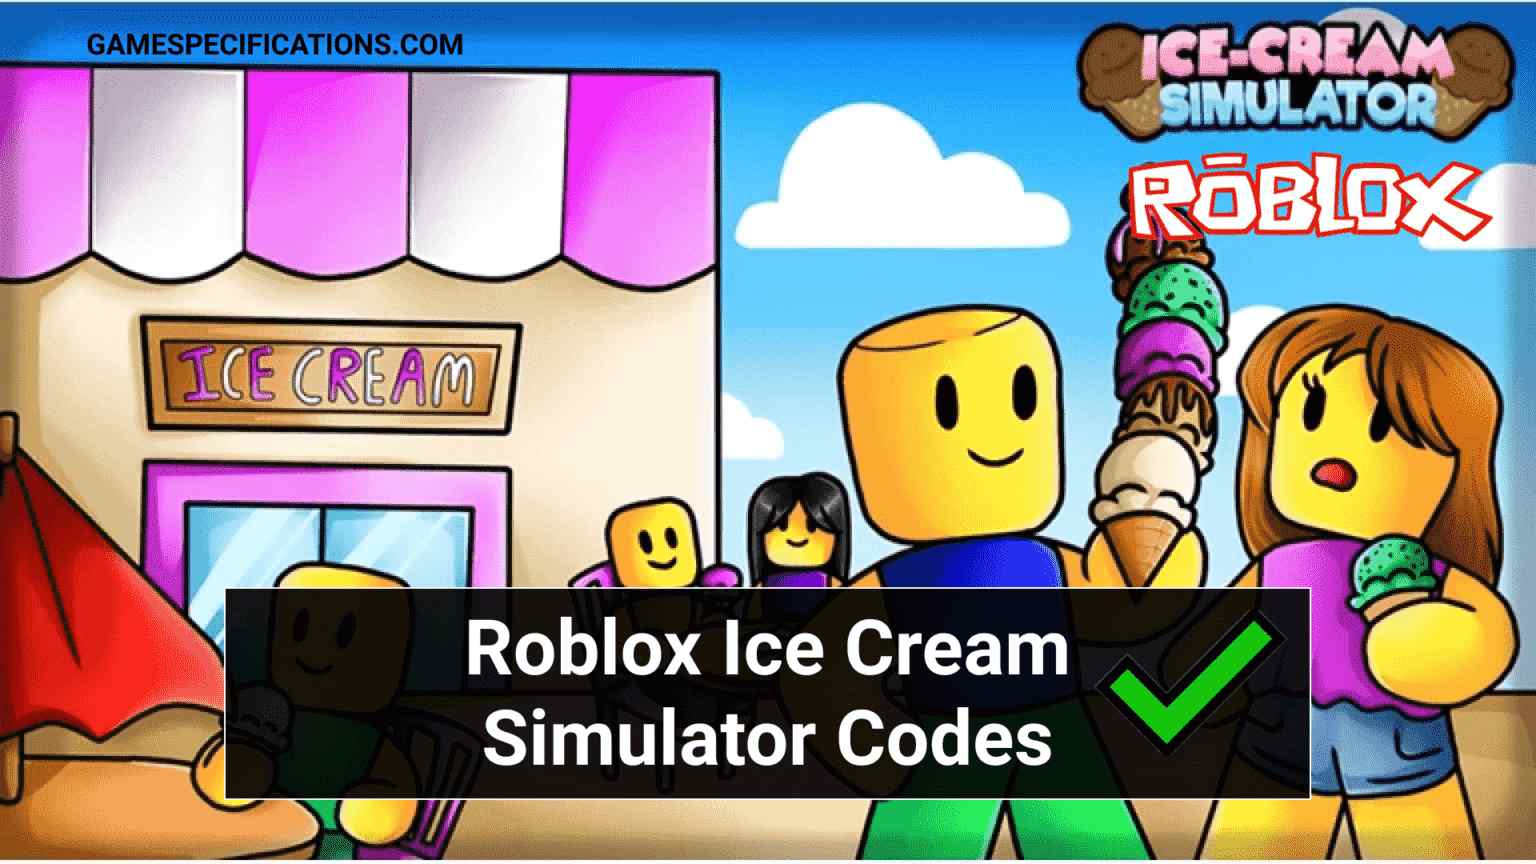 60-roblox-ice-cream-simulator-codes-september-2023-game-specifications